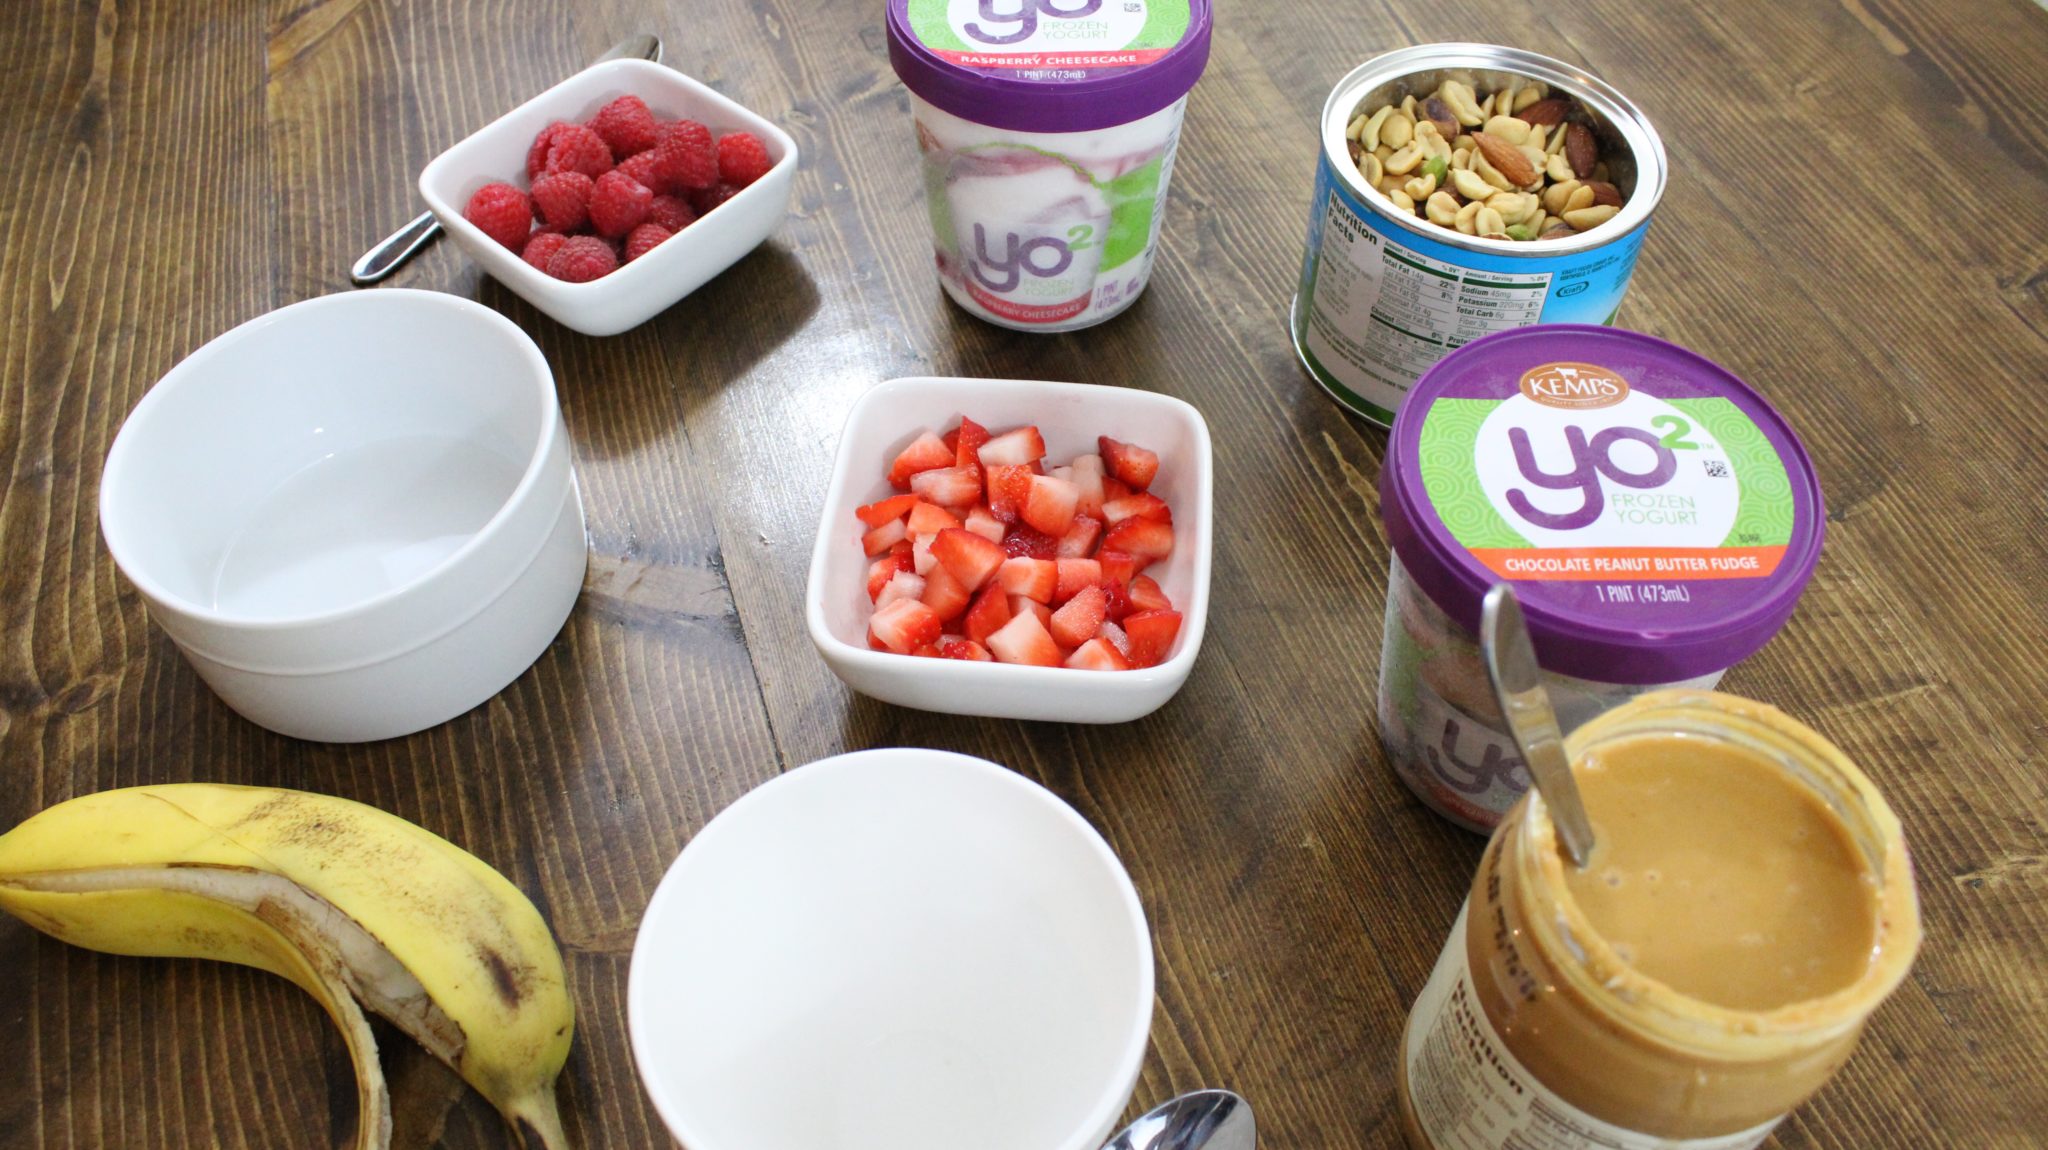 Practicing Self-Care and Indulging in a Guilt-Free Treat with Kemps Yo². #ad #it'sthecows #Yo2, chocolate peanut butter frozen yogurt, healthy ice cream sundae bar. Grab your $1 coupon here > https://ooh.li/33ed79c